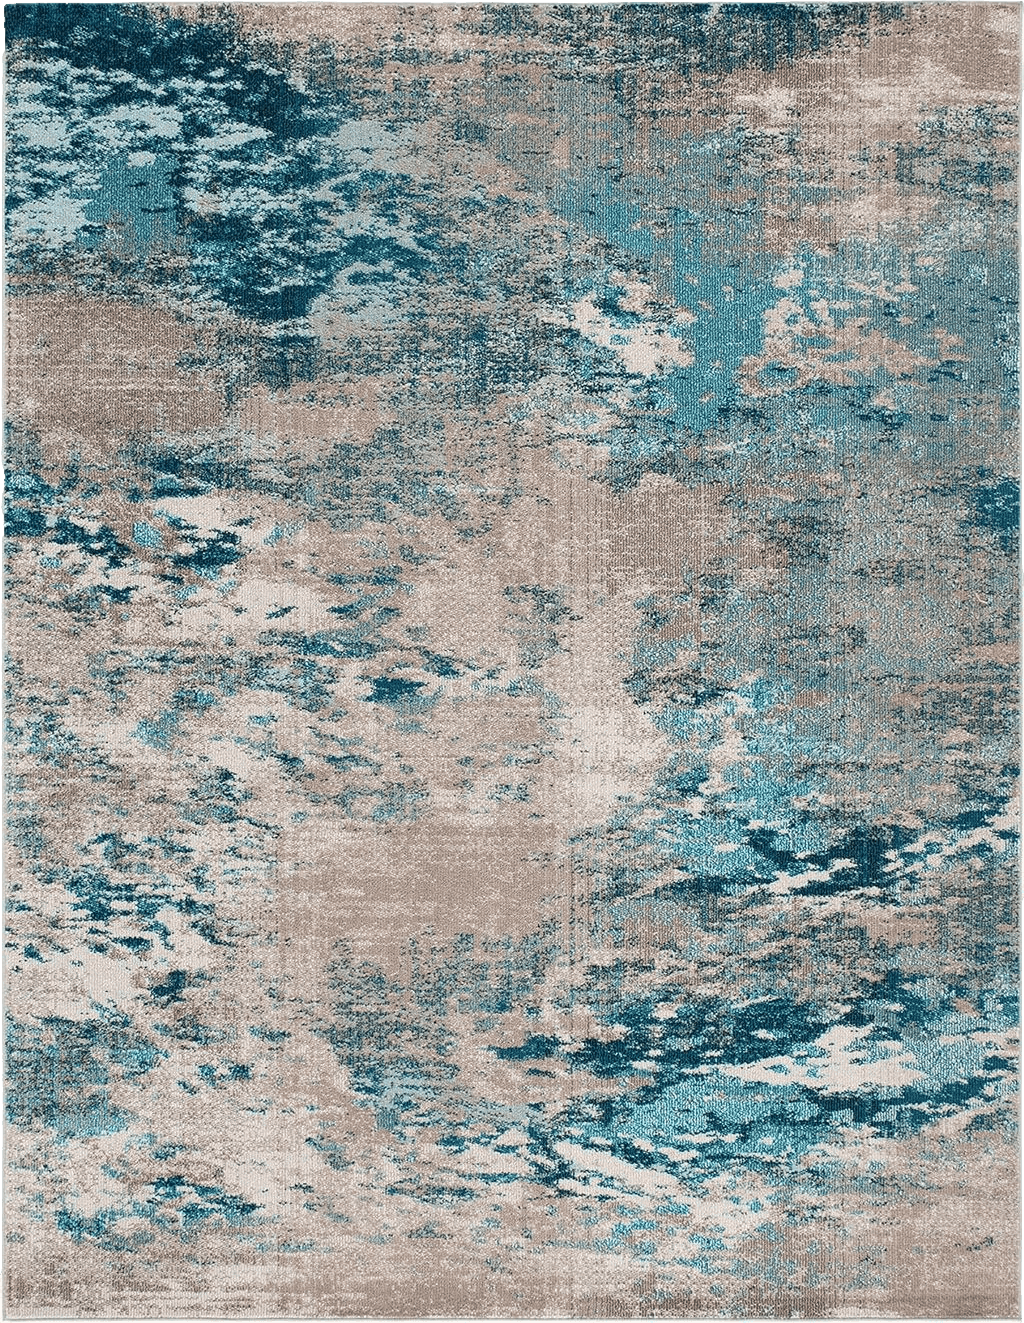 Area Oversized SAFAVIEH Madison Collection Area Rug - 10' x 14', Blue & Grey, Modern Boho Abstract Design, Non-Shedding & Easy Care, Ideal for High Traffic Areas in Living Room, Bedroom (MAD440M)